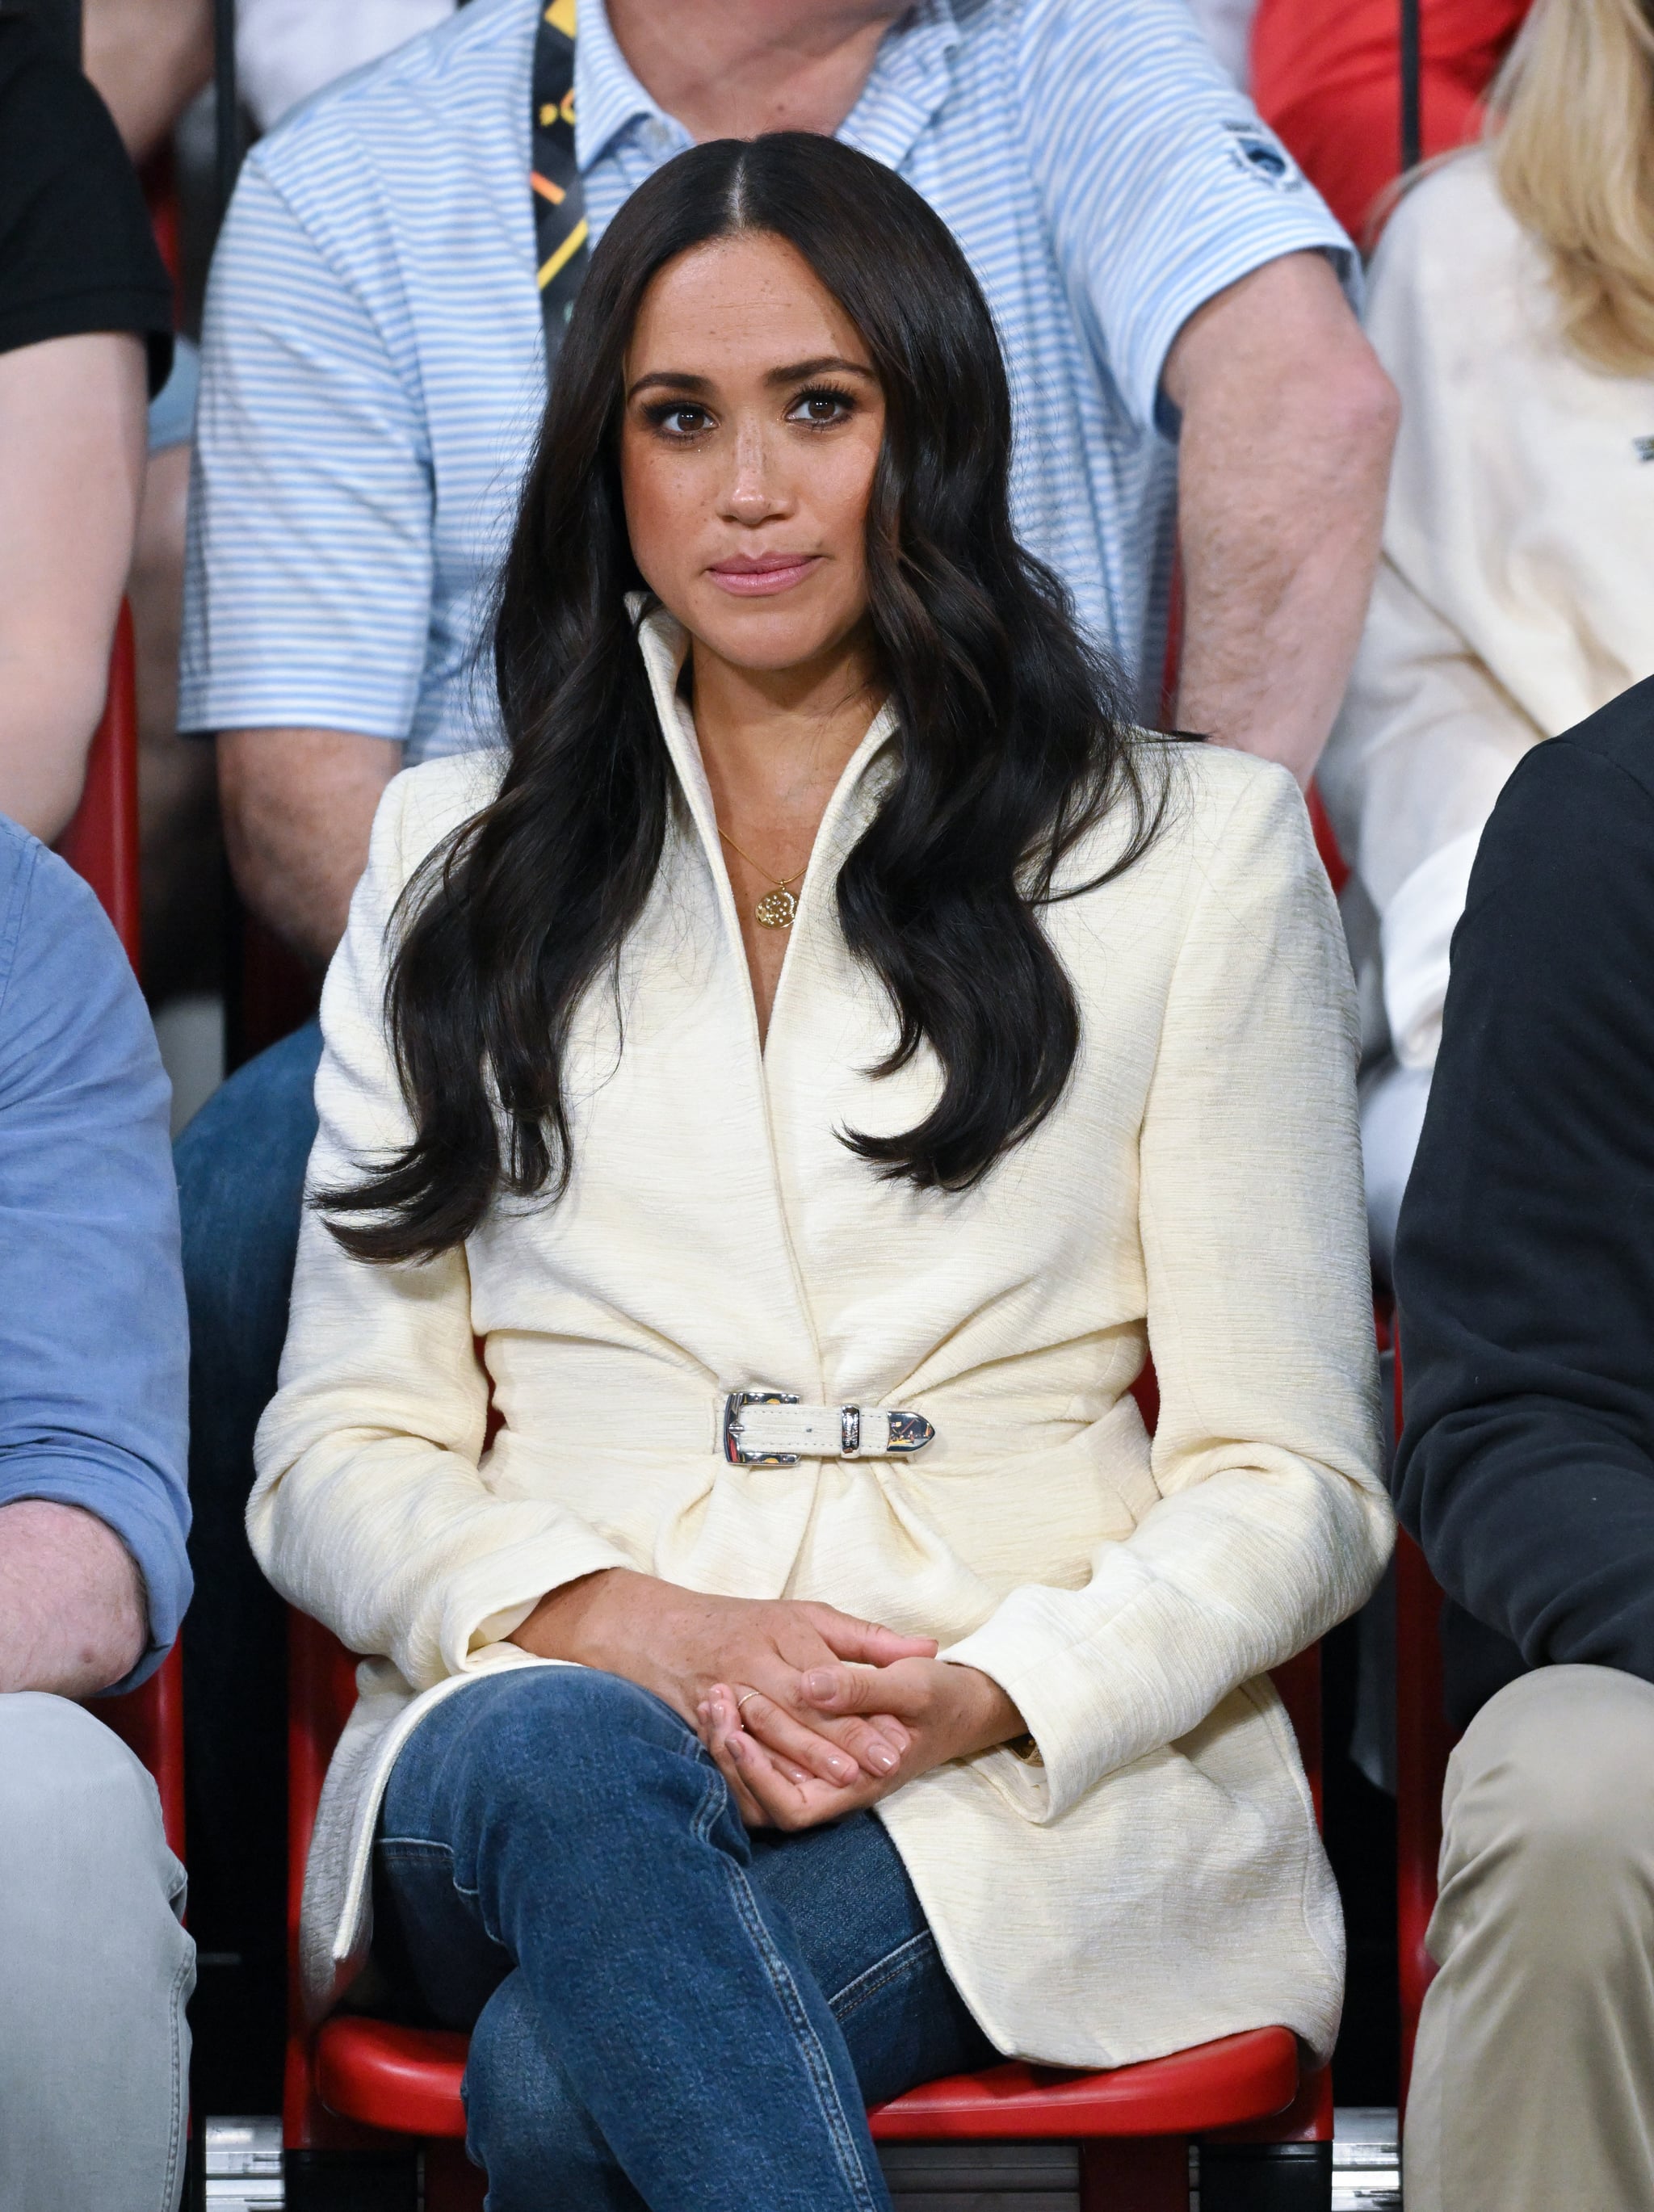 THE HAGUE, NETHERLANDS - APRIL 17: Meghan, Duchess of Sussex attends the sitting volleyball event during the Invictus Games at Zuiderpark on April 17, 2022 in The Hague, Netherlands. (Photo by Karwai Tang/WireImage)